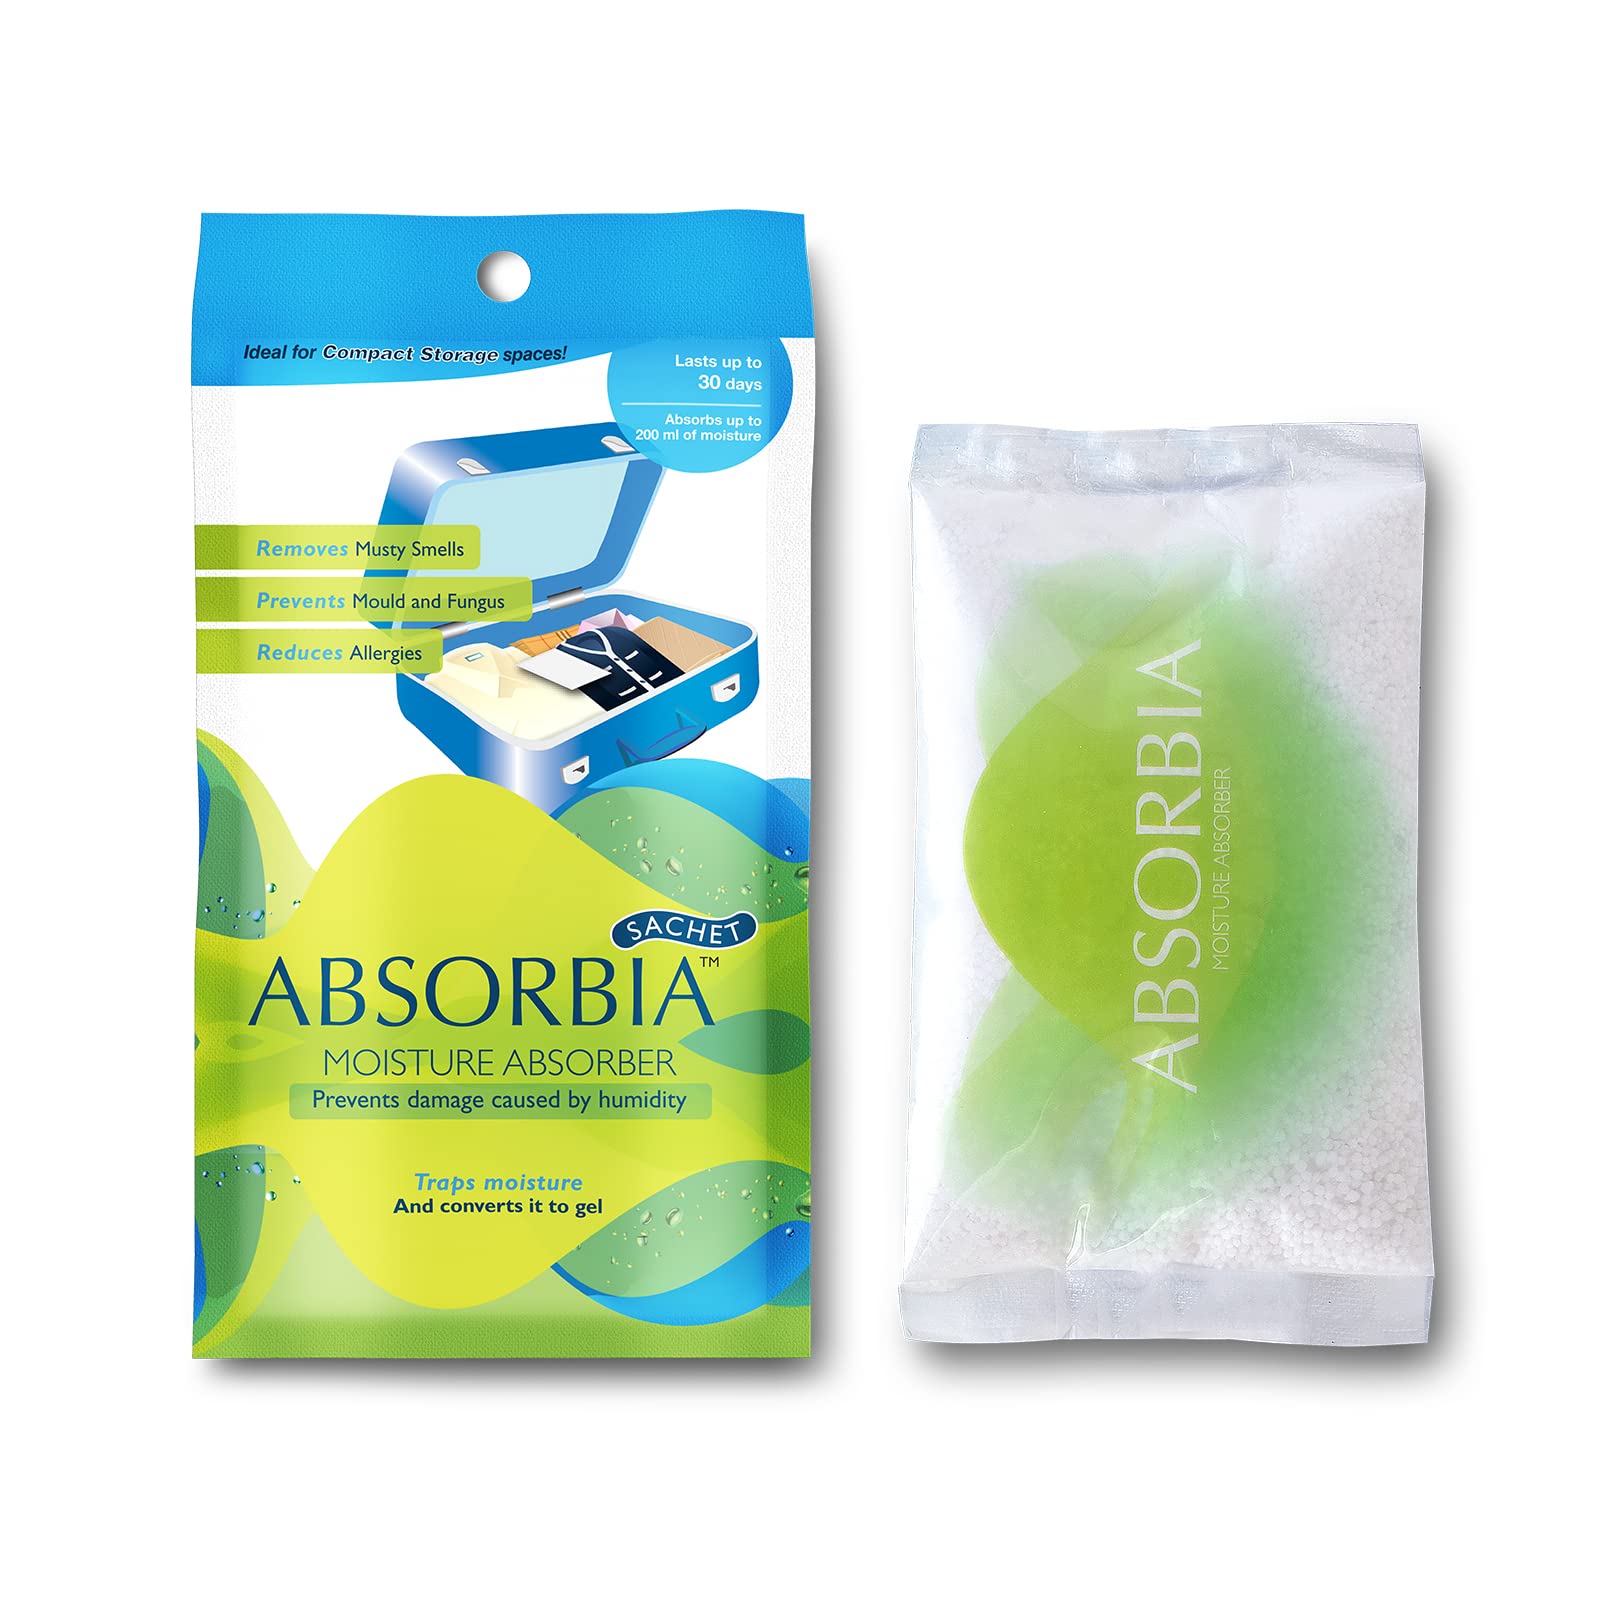 Absorbia Moisture Absorber Sachet - Pack of 6 (Absorbs 200ml Each)|Dehumidier for Bags, Suitcases Drawers|Absorbia Golf Gel Air Freshener - Pack of 2 (100g X 2 pcs)|Water based, Low VOC & pDCB free……